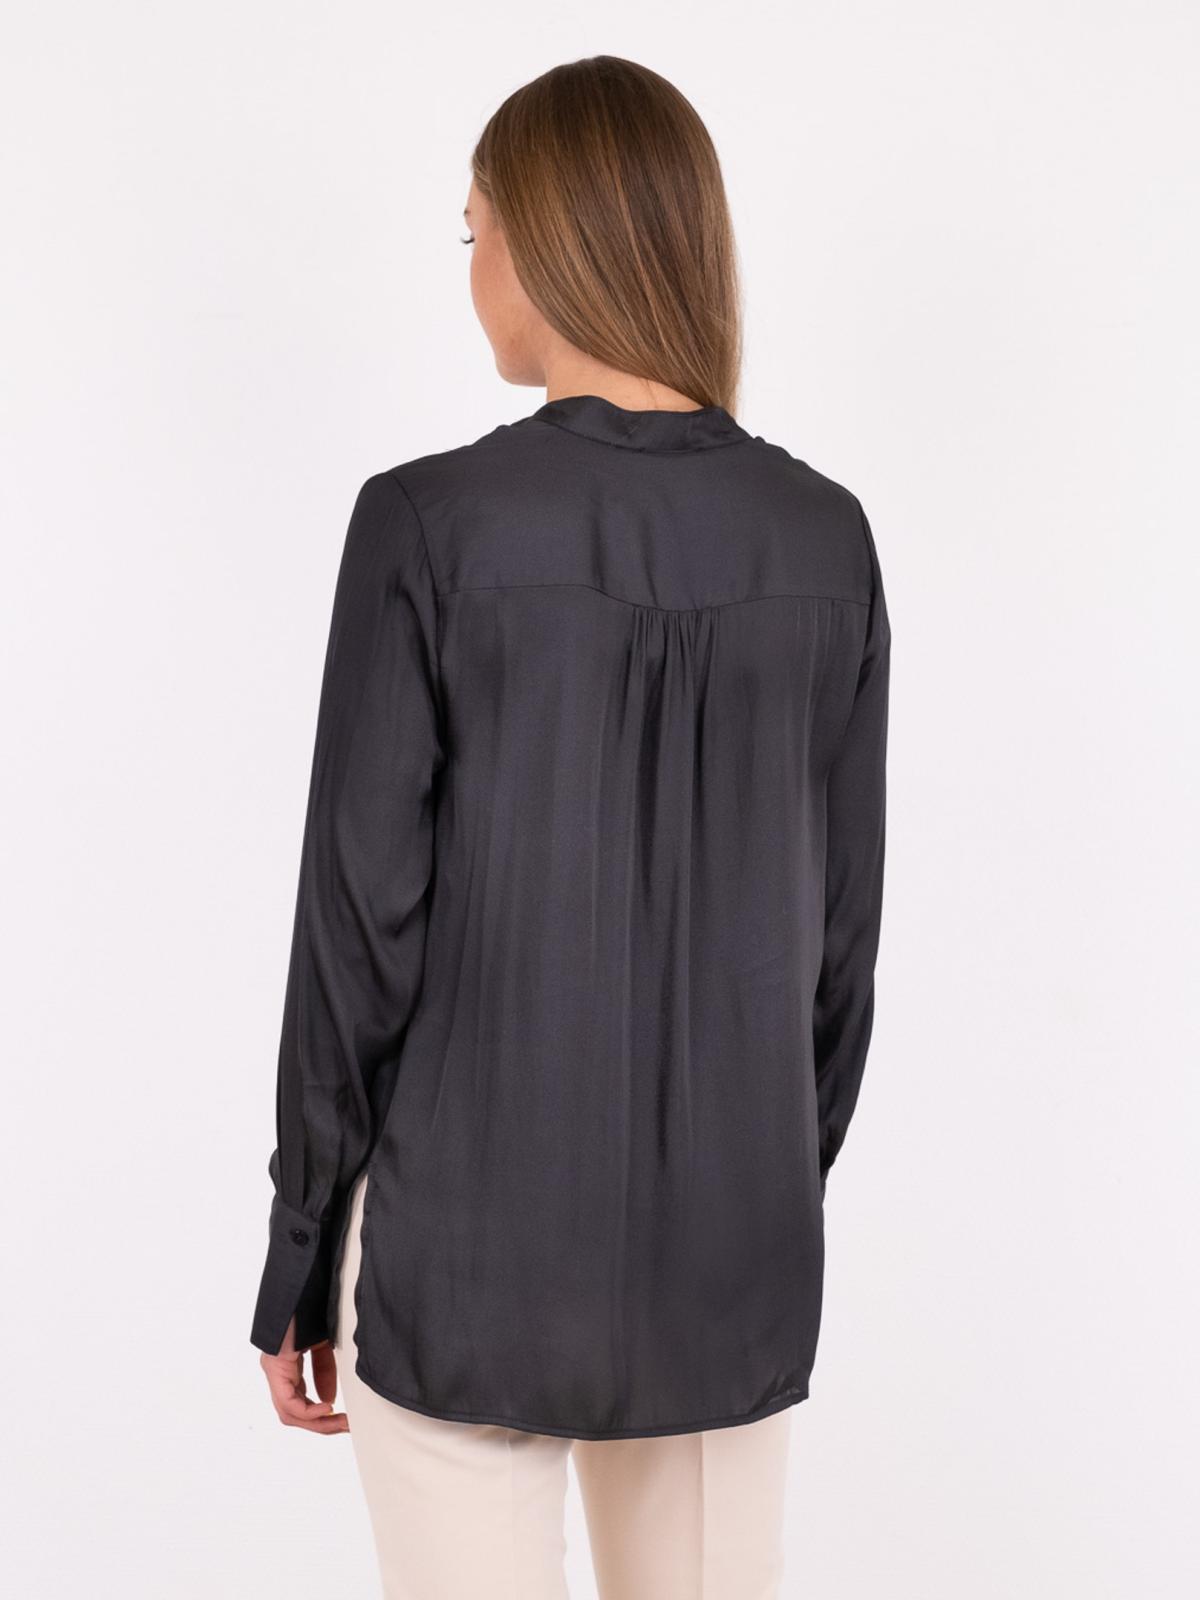 Neo Noir Lucia Solid Bluse Sort